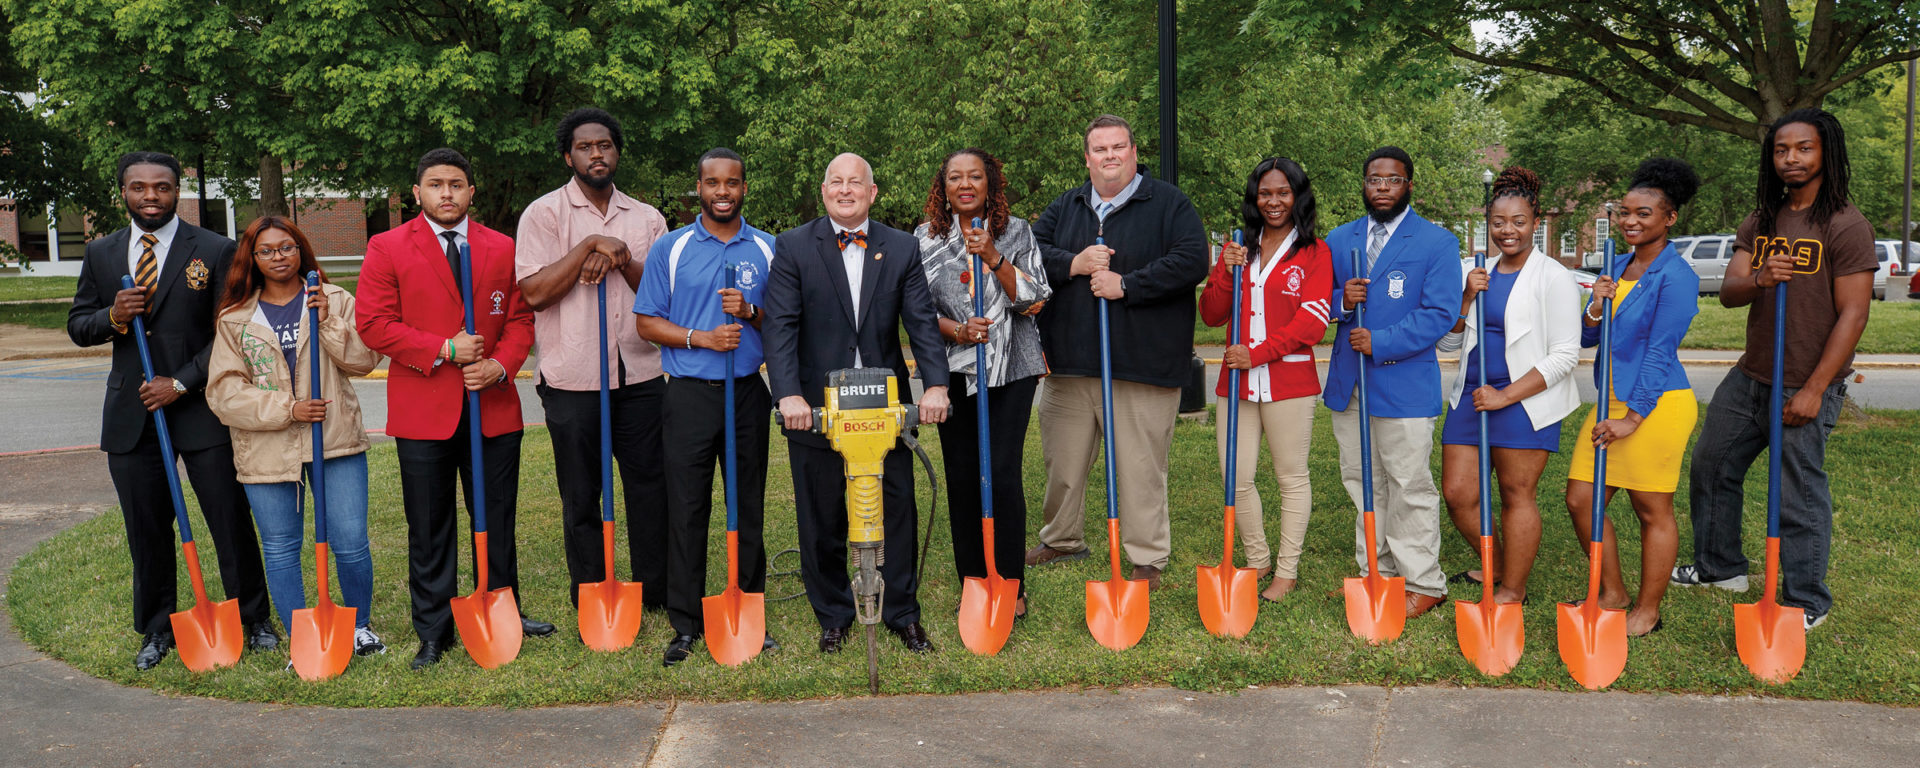 Chancellor Keith Carver holds a jackhammer in the center of a group of students and alumni representing their Divine Nine fraternities and sororities